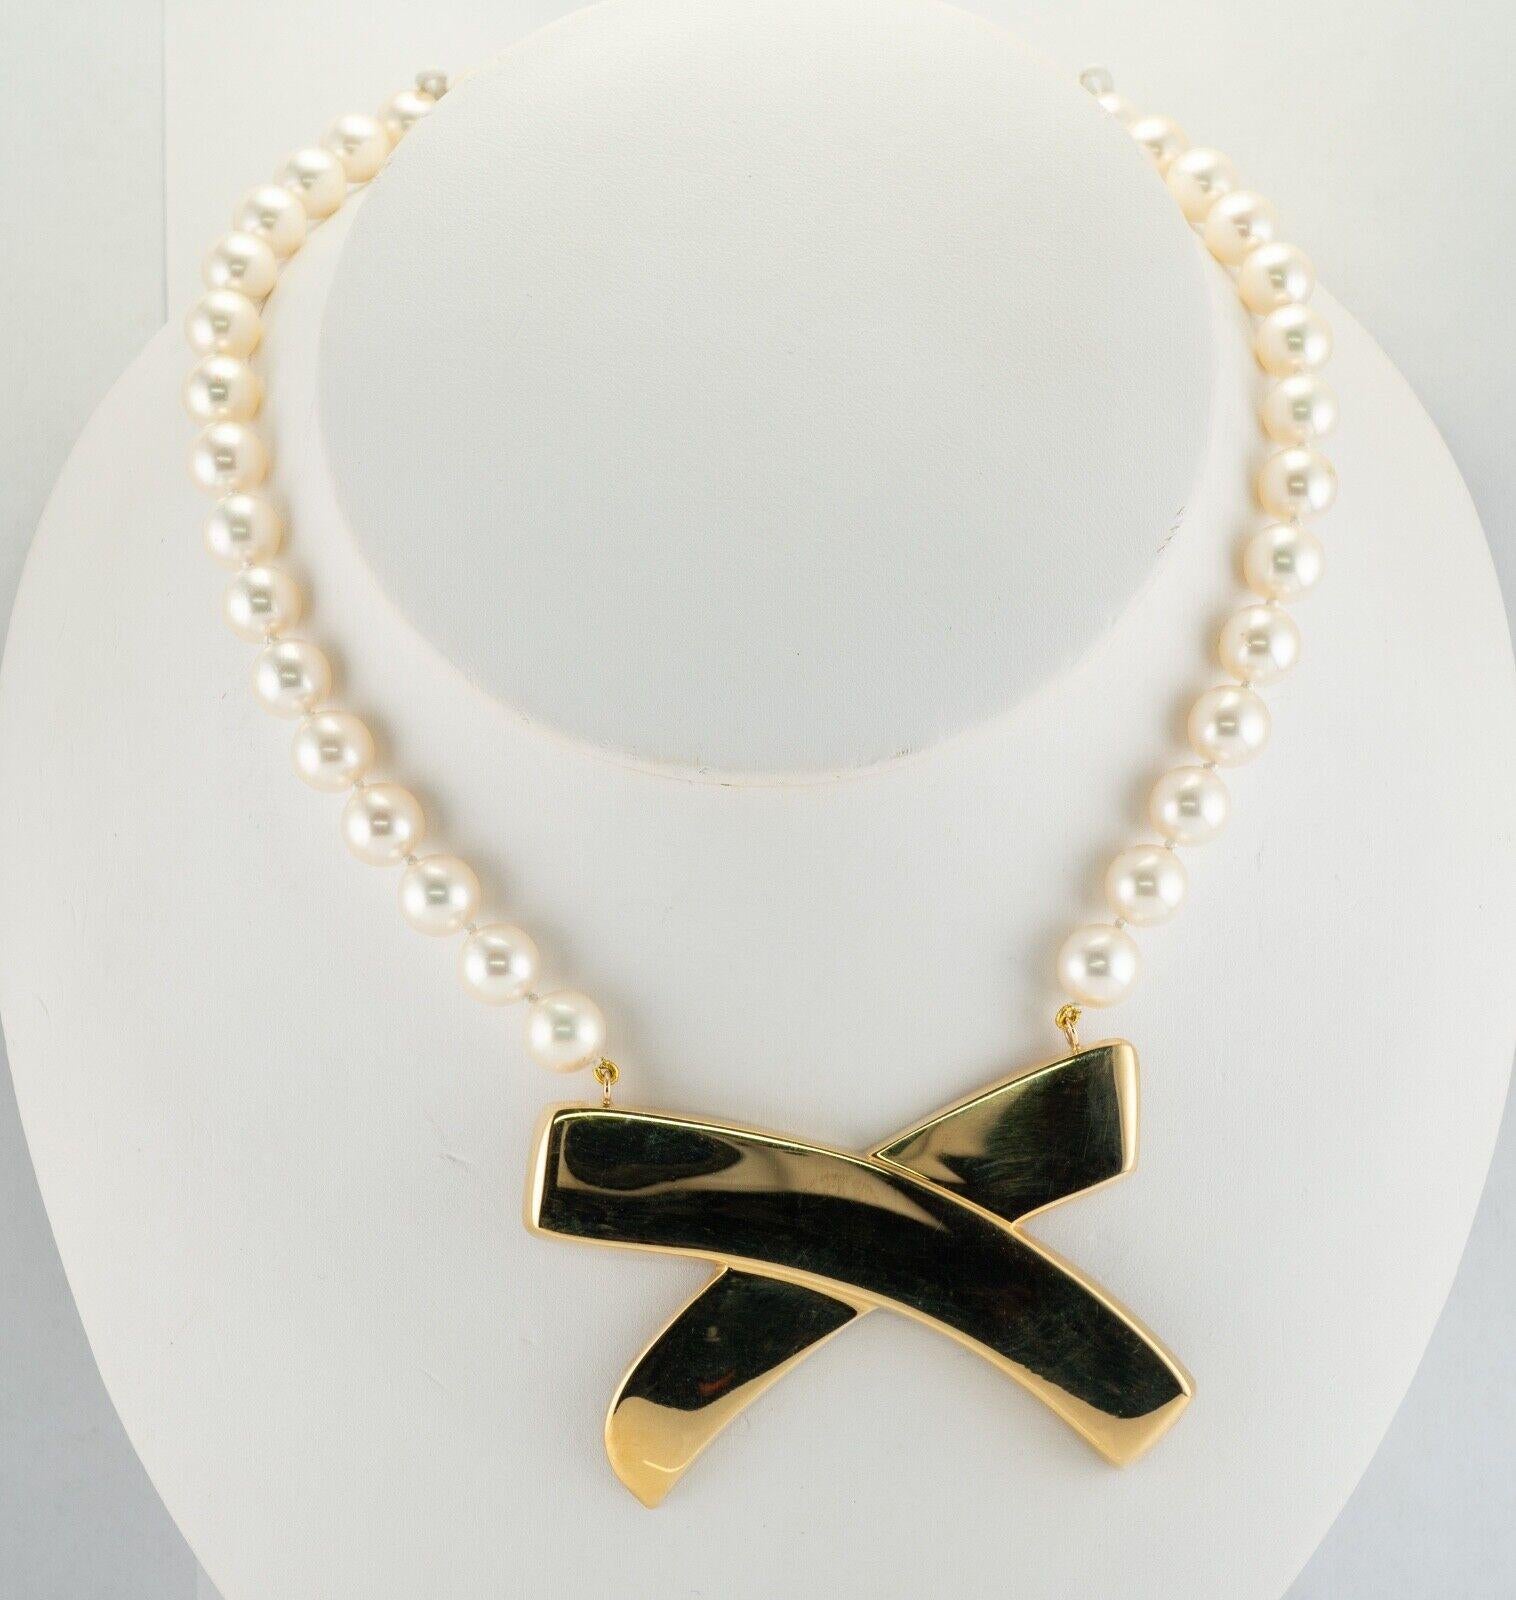 Tiffany and Co  Paloma Picasso Pearl Necklace Choker 18K Gold

This incredible rare Tiffany&Co necklace is set with genuine cultured Akoya Pearls and crafted in solid 18K Yellow Gold. Forty-four 8.25mm Pearls have great luster and symmetry, they are